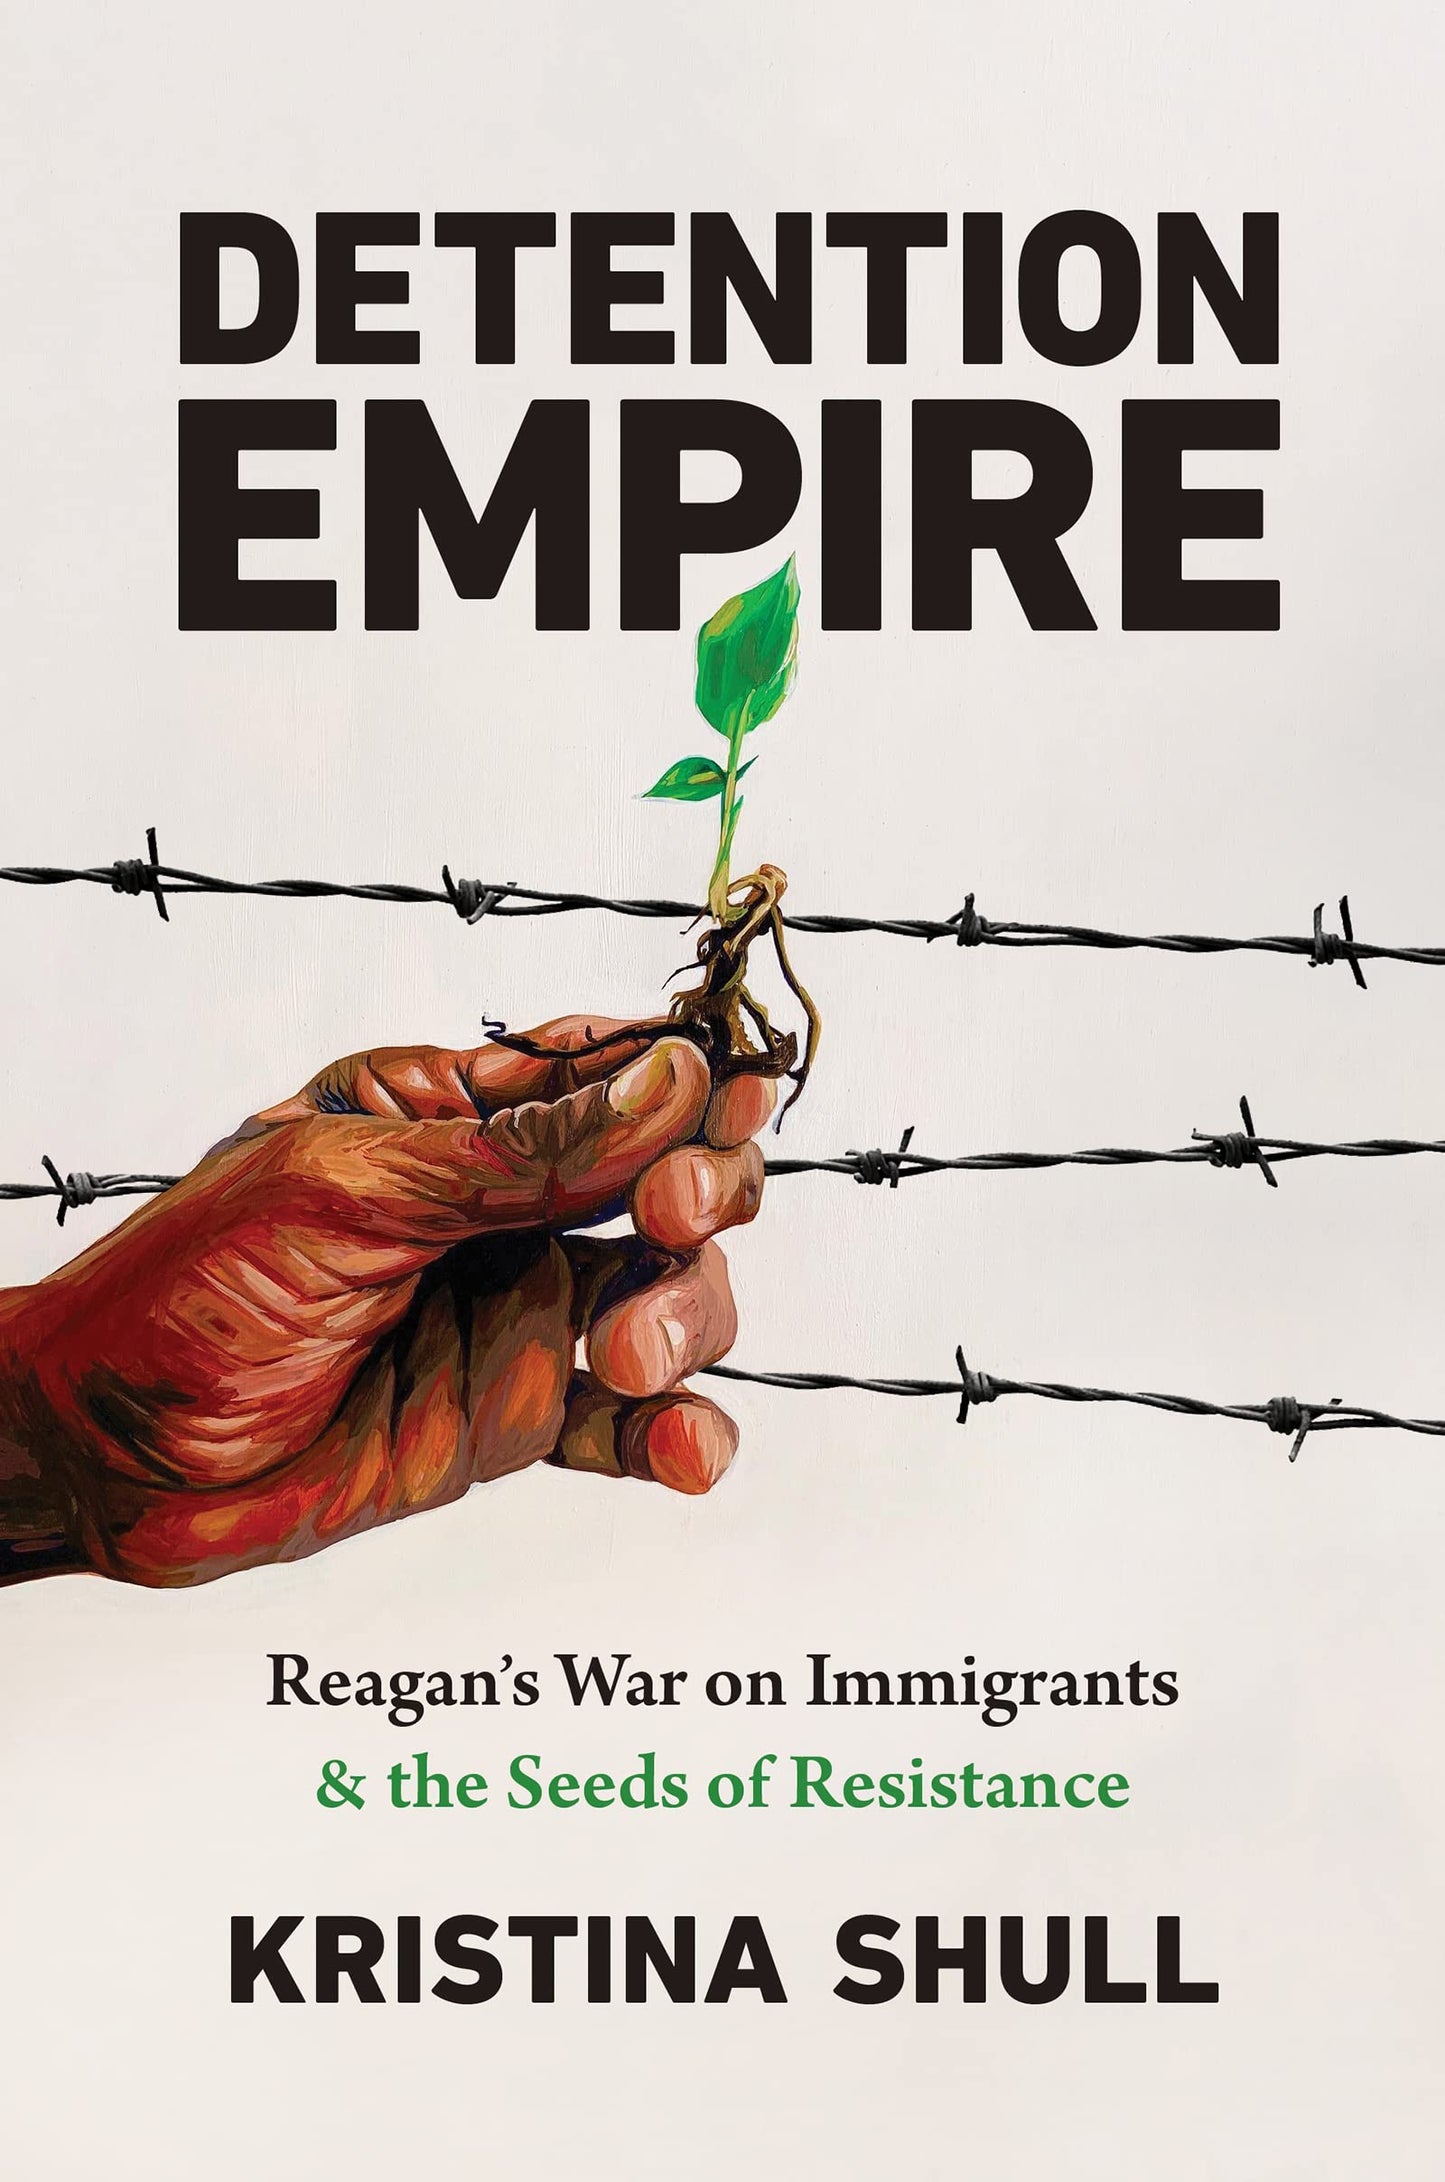 Detention Empire: Reagan's War on Immigrants and the Seeds of Resistance (Justice, Power, and Politics)